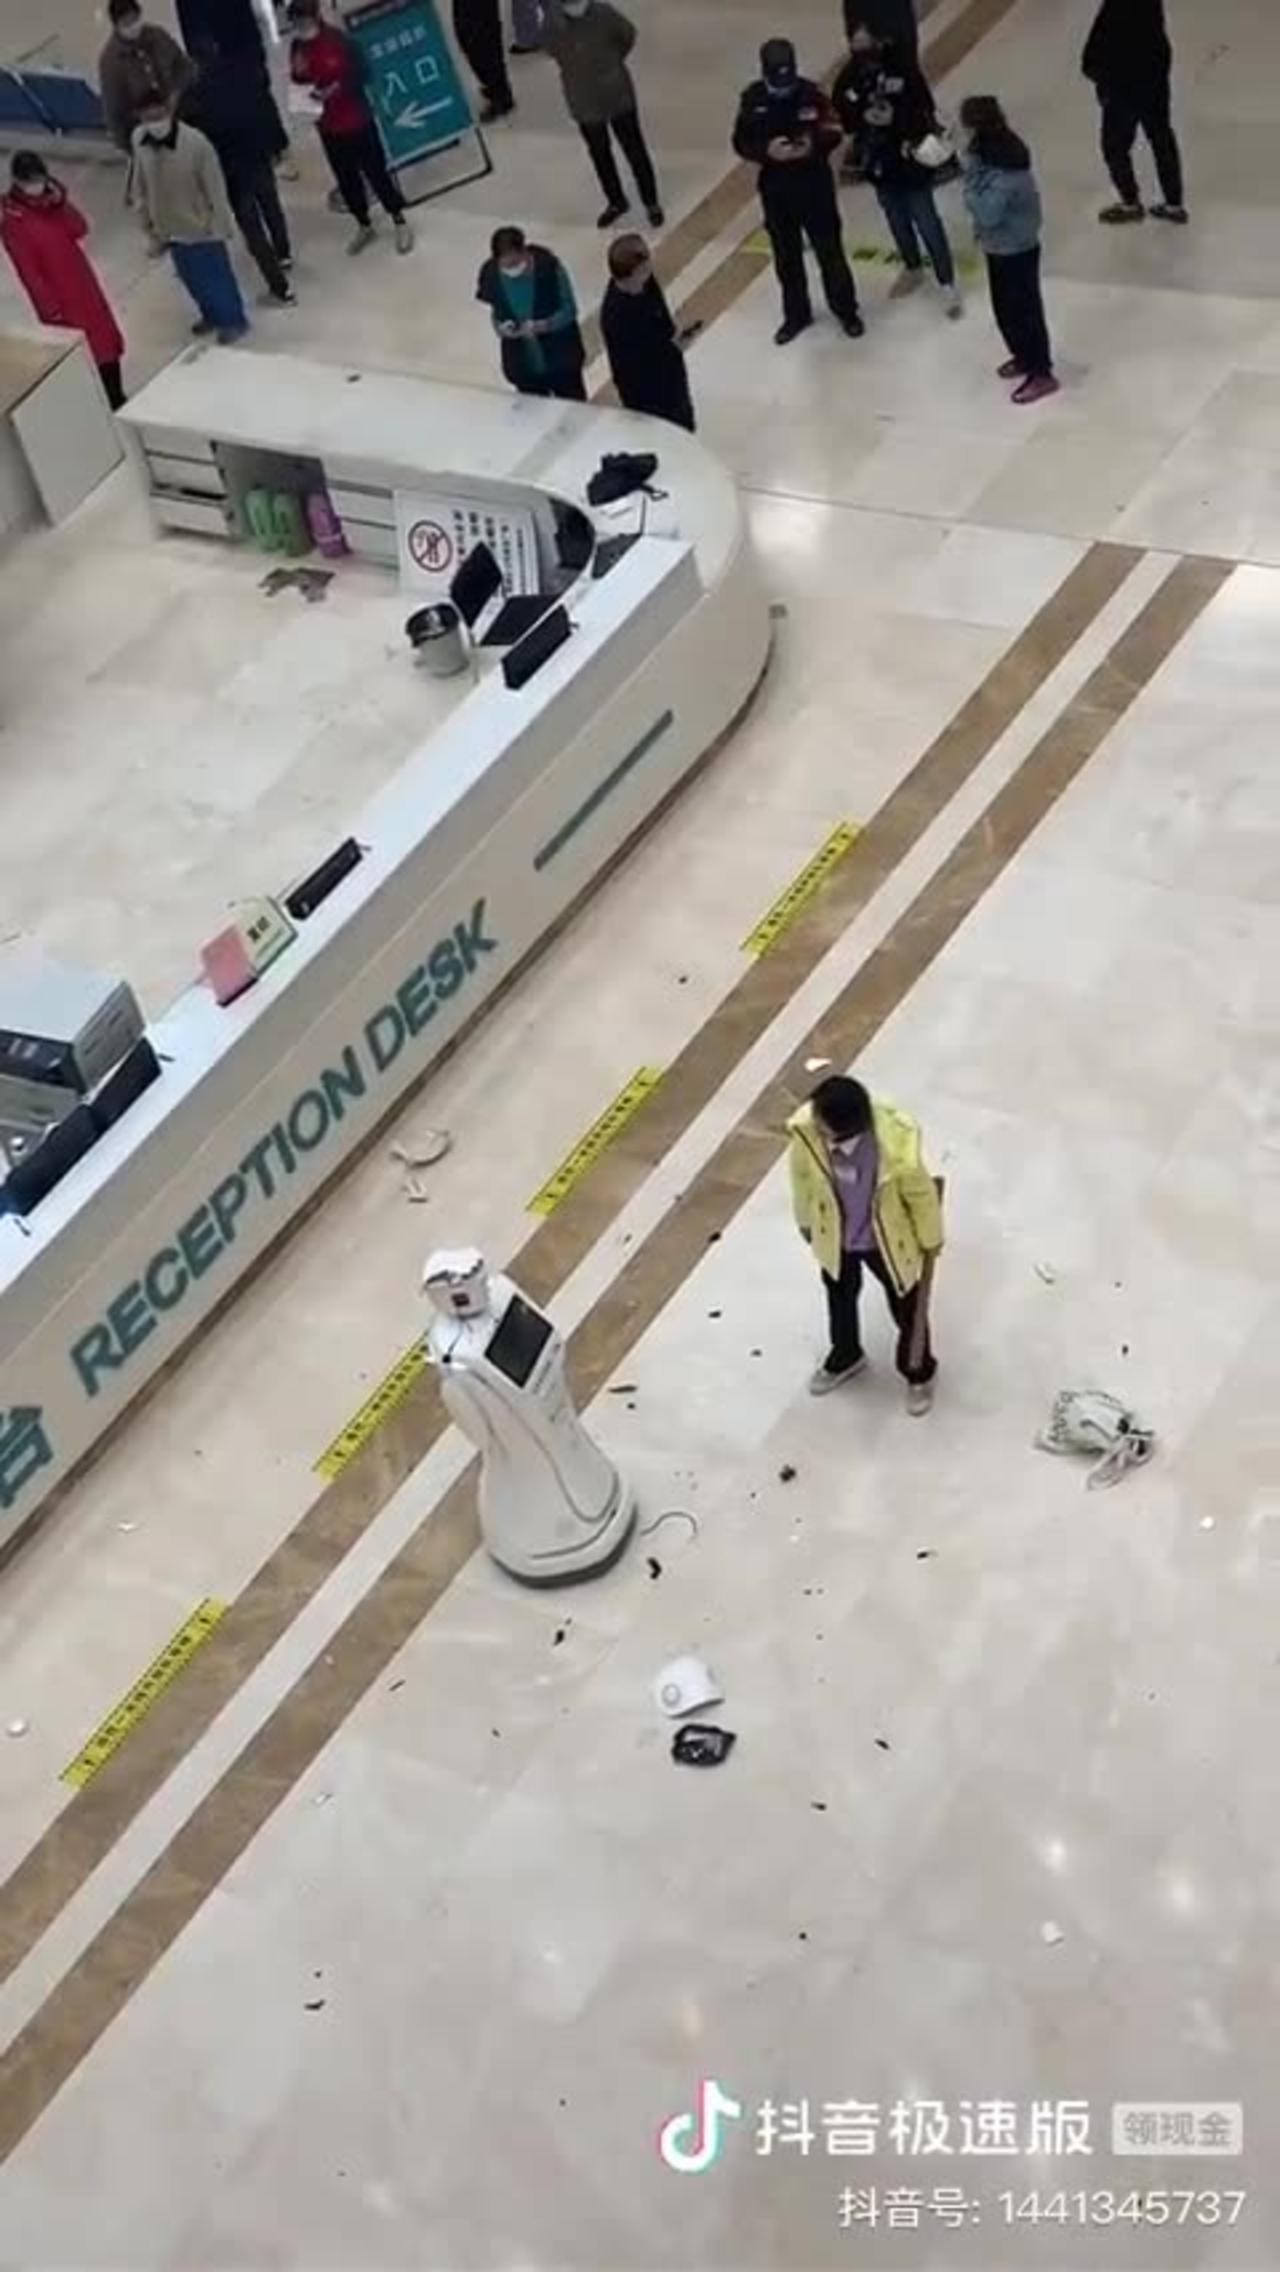 Chinese woman smashes up a robot in the hospital.